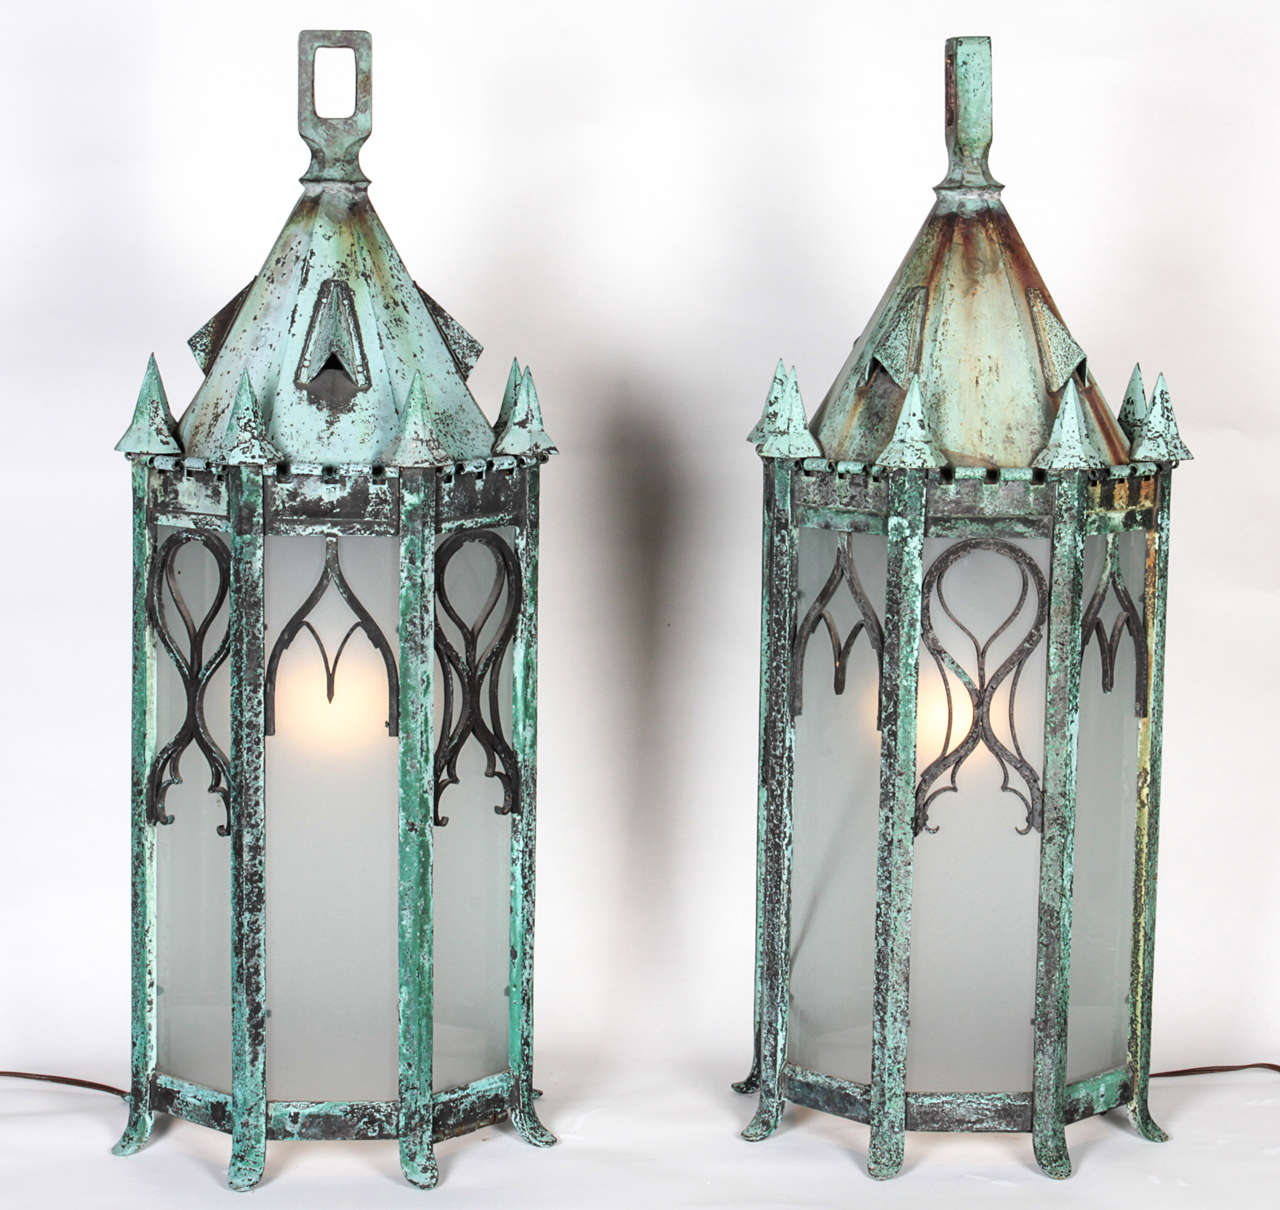 American, early 20th century pair of bronze lamps. Excellent aged green patina. The pair has been rewired and newly glazed. They have a fabulous patina and remarkable workmanship. Can be used as hanging lamps or table lamps. Incredibly unique and